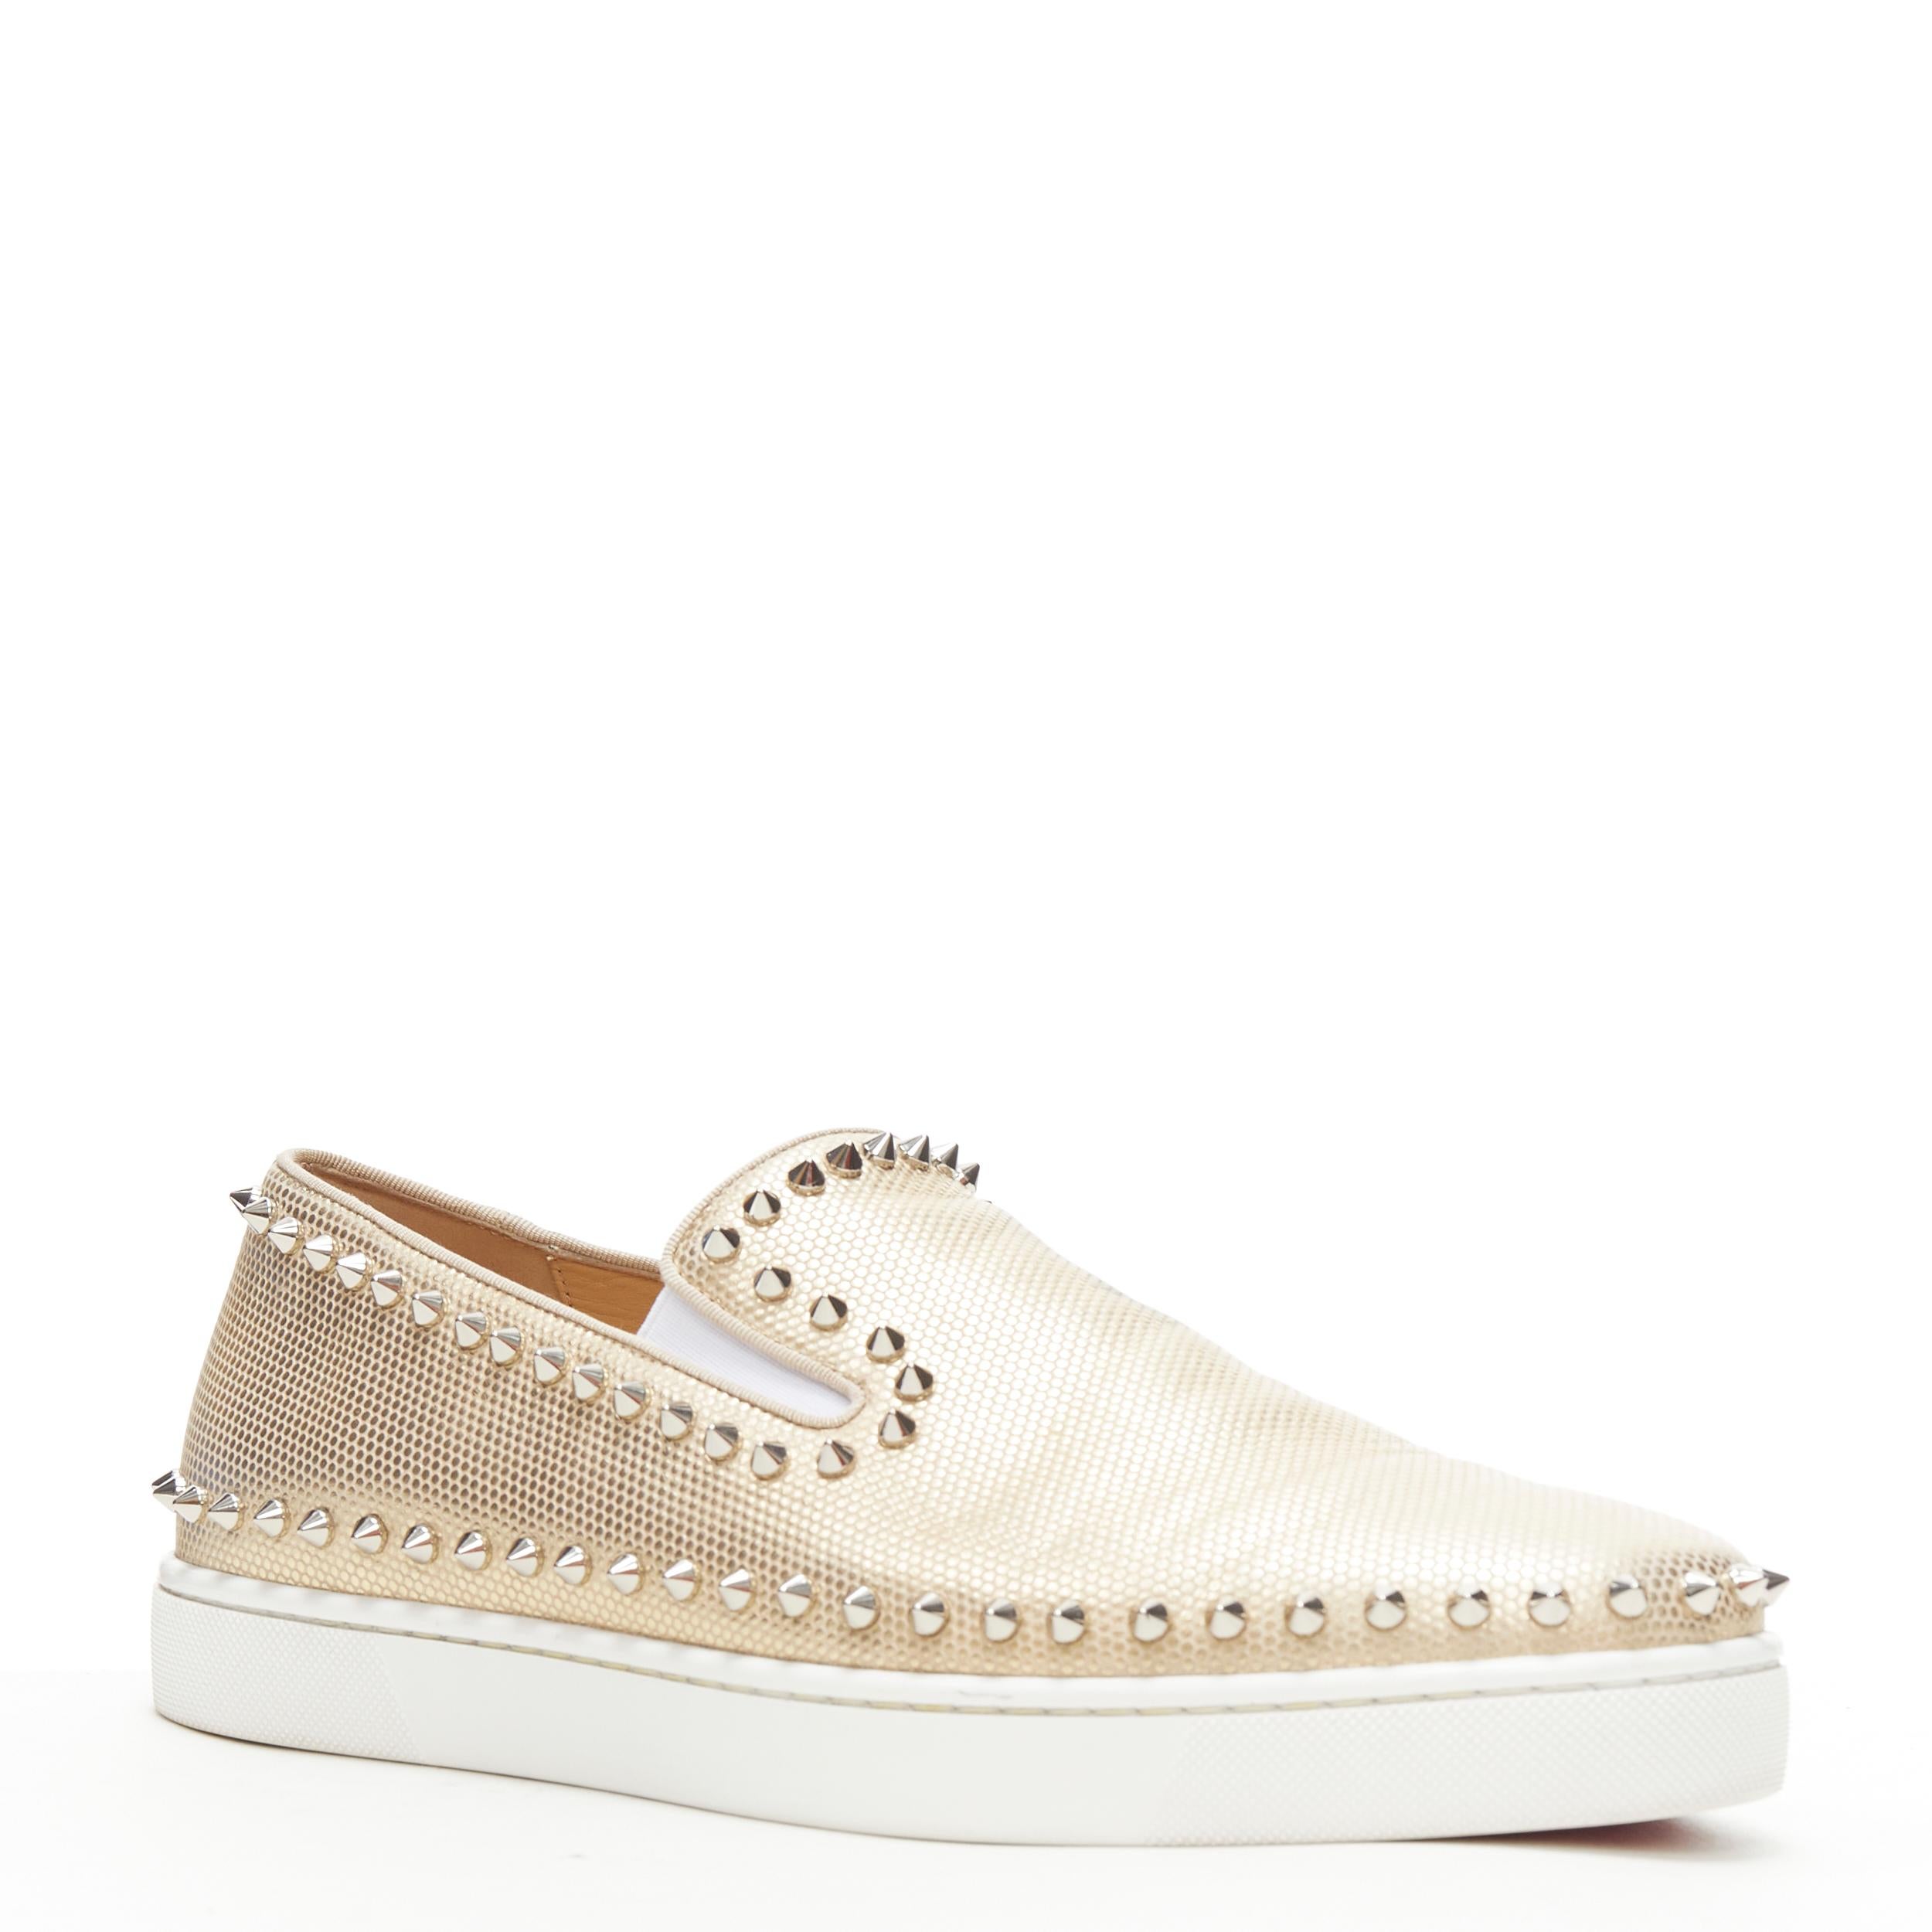 CHRISTIAN LOUBOUTIN Pik Boat gold leather spike stud low skate sneakers EU43 
Reference: TGAS/B01036 
Brand: Christian Louboutin 
Designer: Christian Louboutin 
Model: Pik boat gold 
Material: Leather 
Color: Gold 
Pattern: Solid 
Extra Detail: